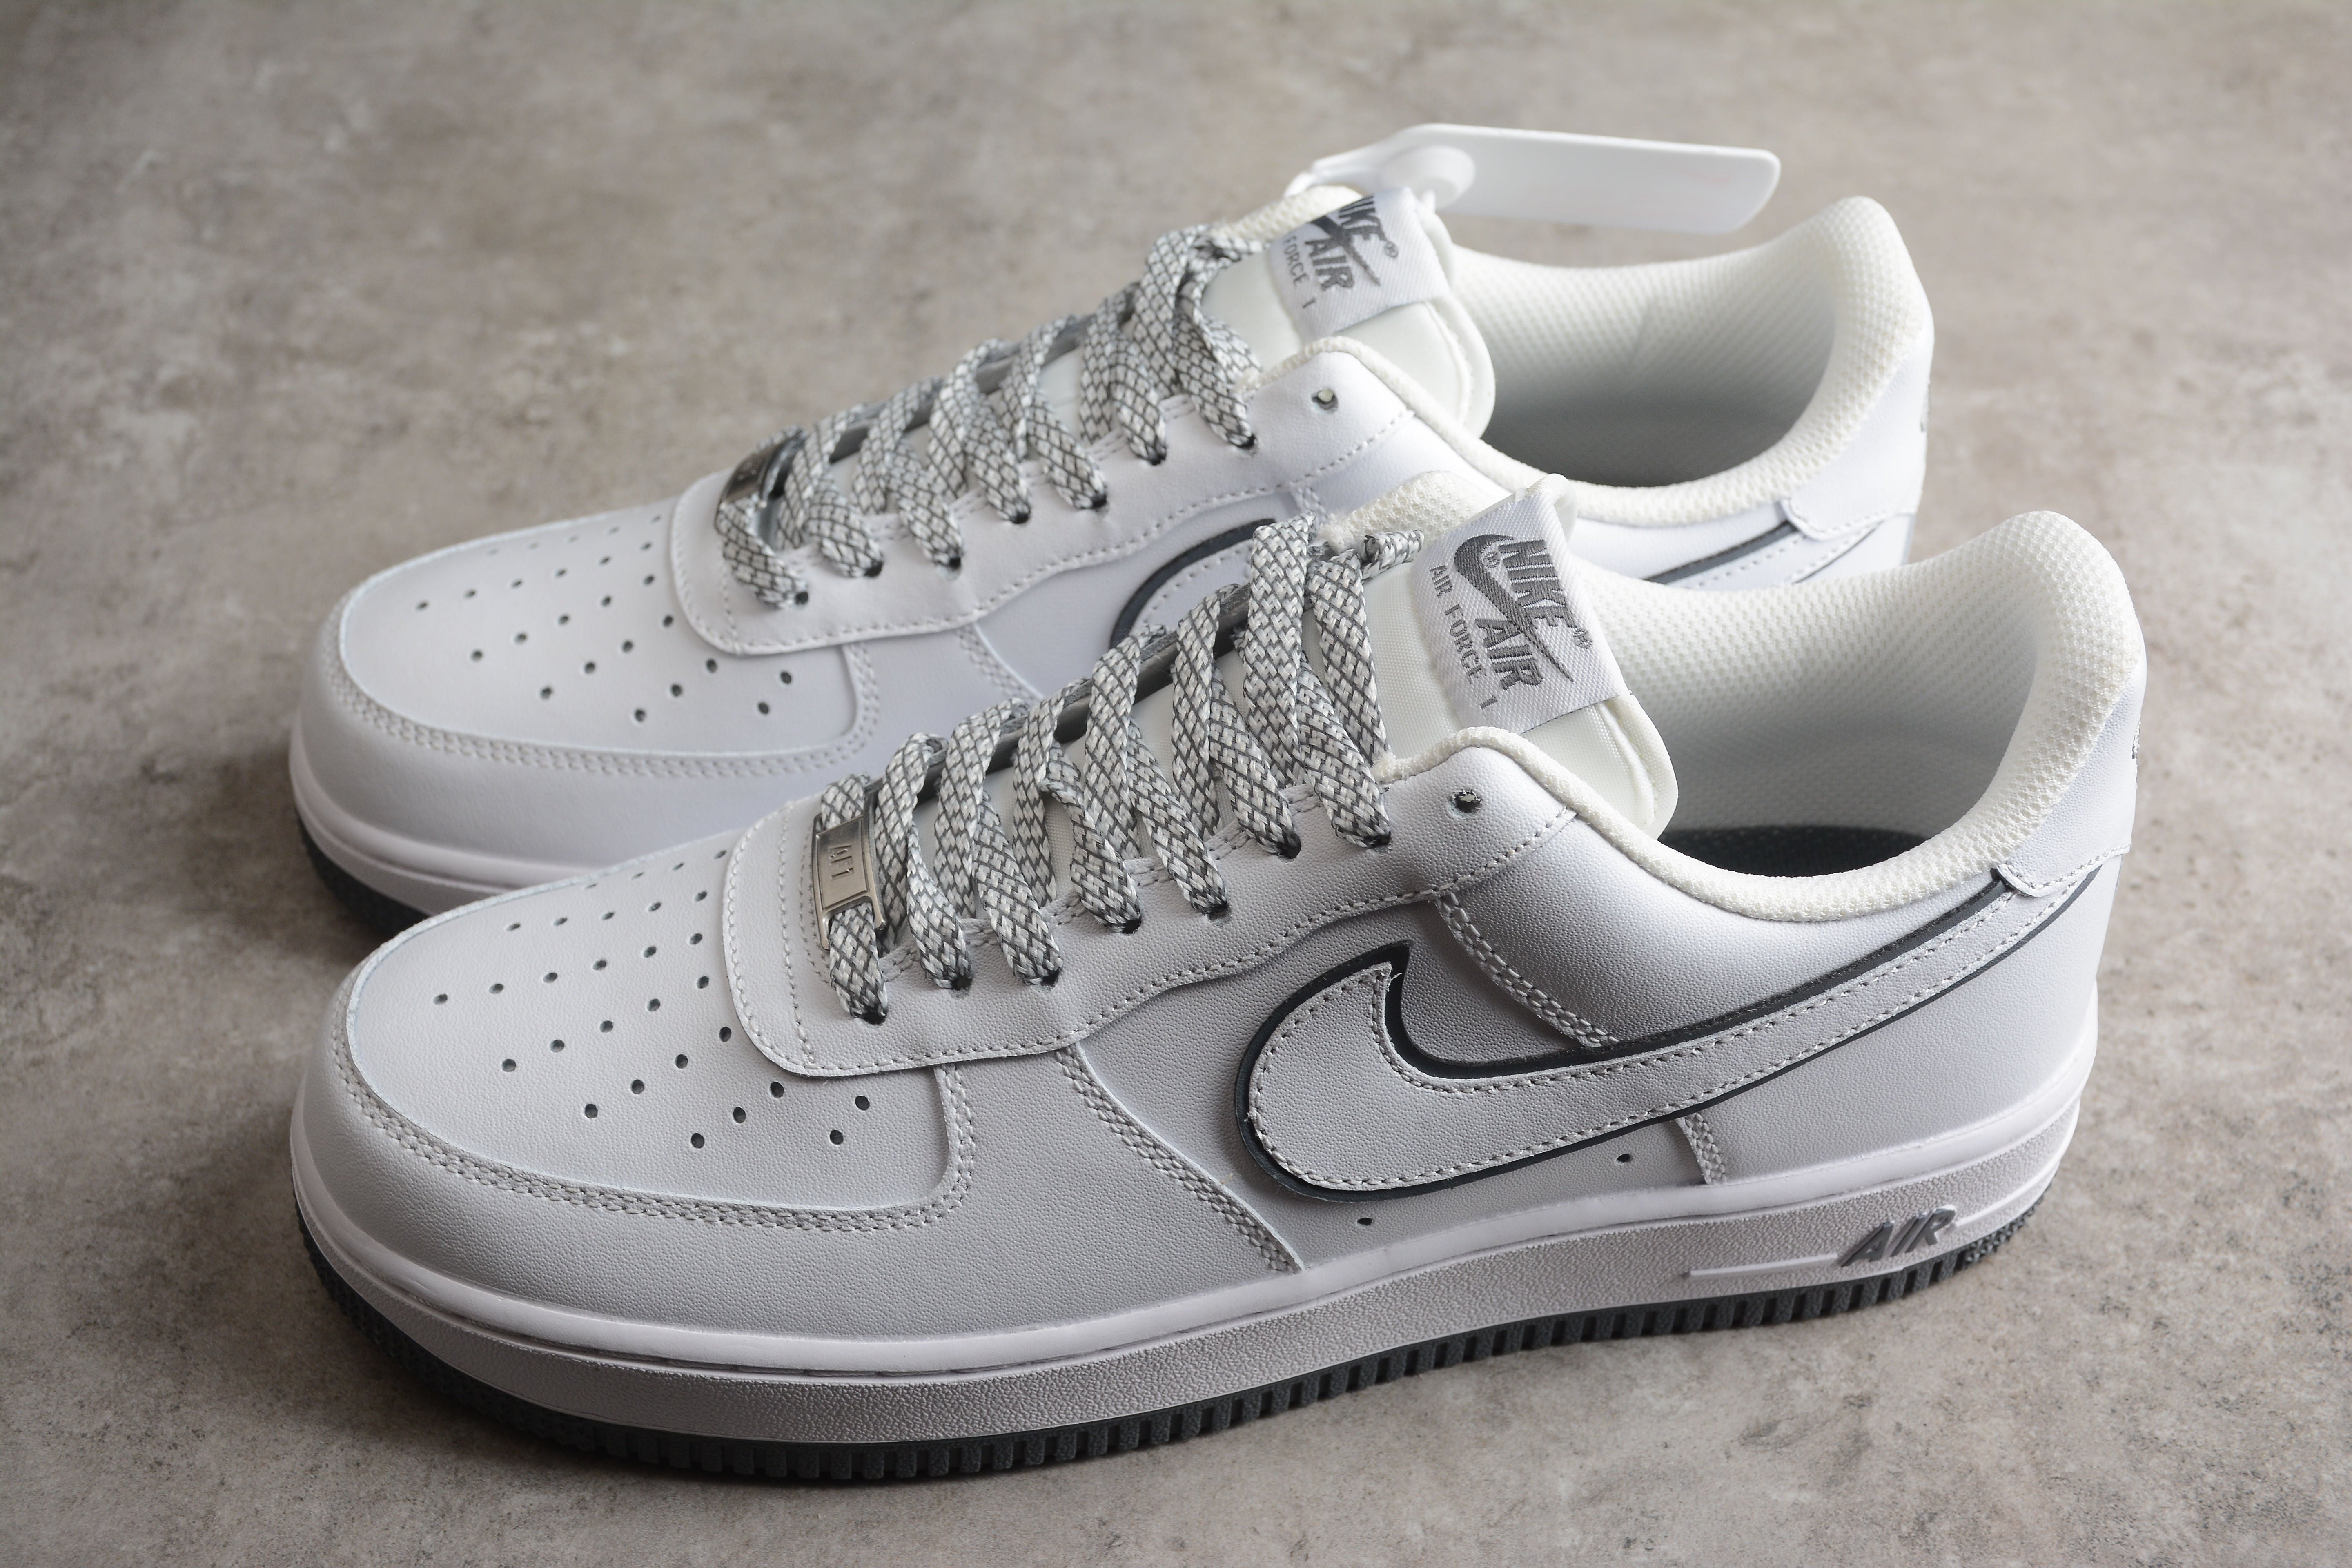 NikeWMNS Air Force 1 AF1 - White